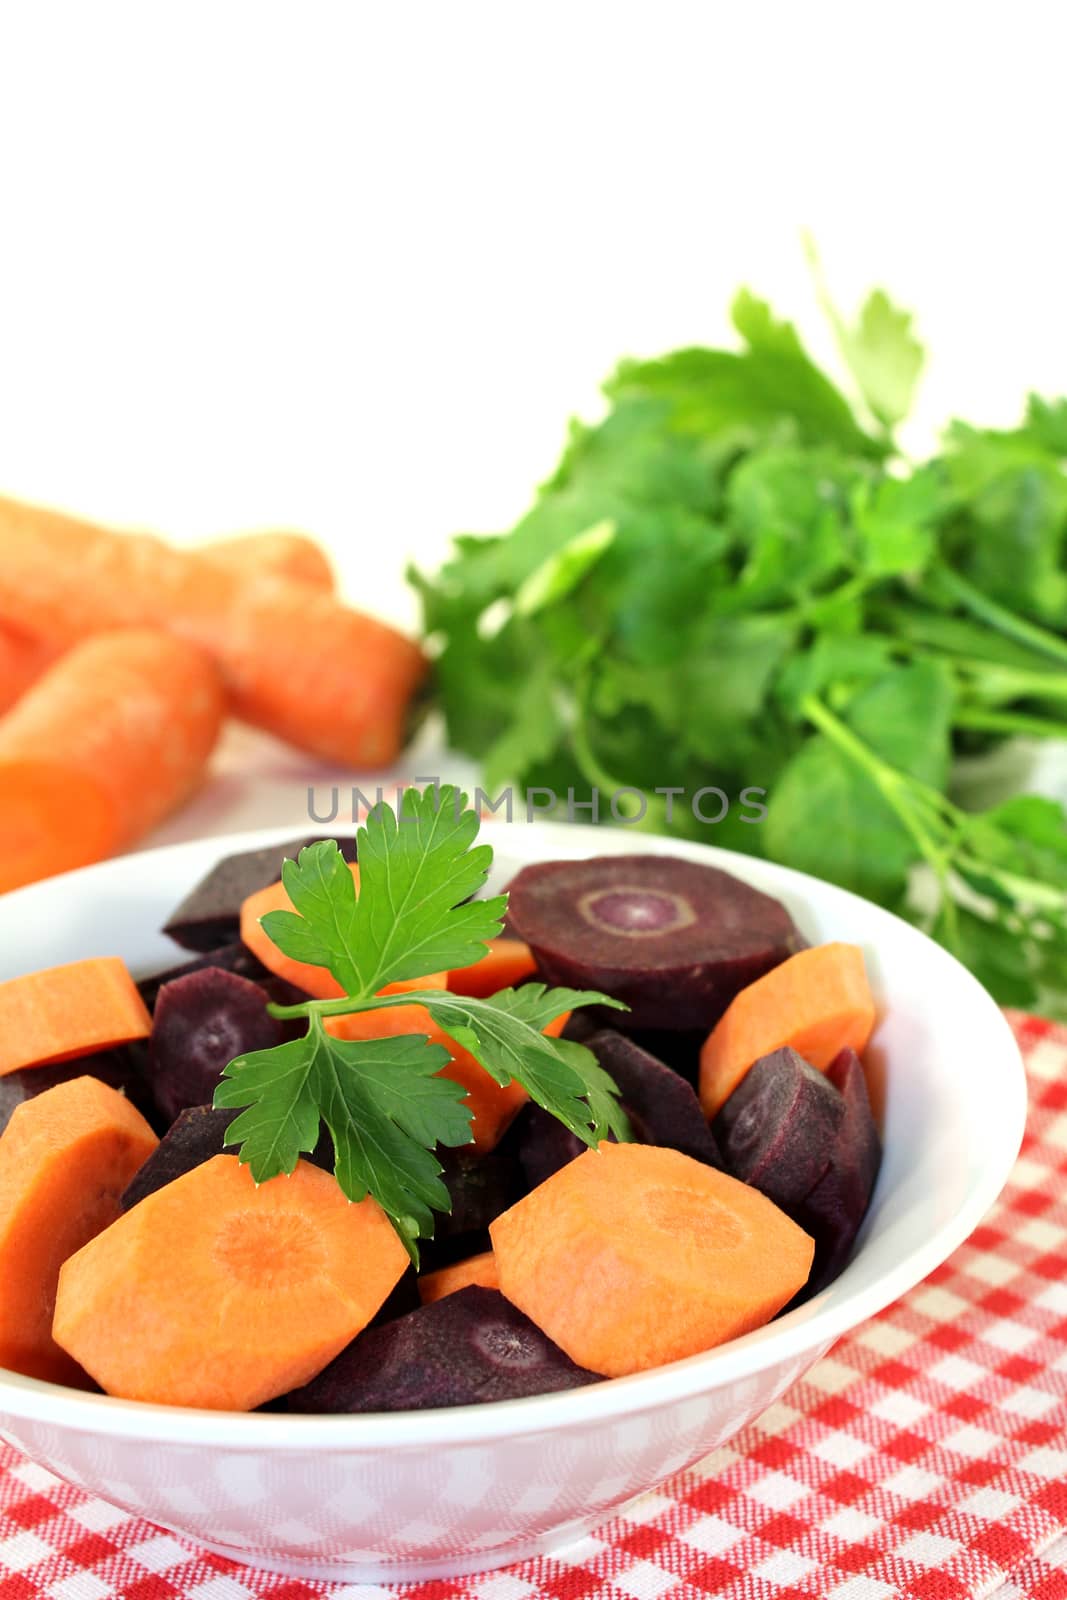 orange and purple carrots with green parsley by discovery